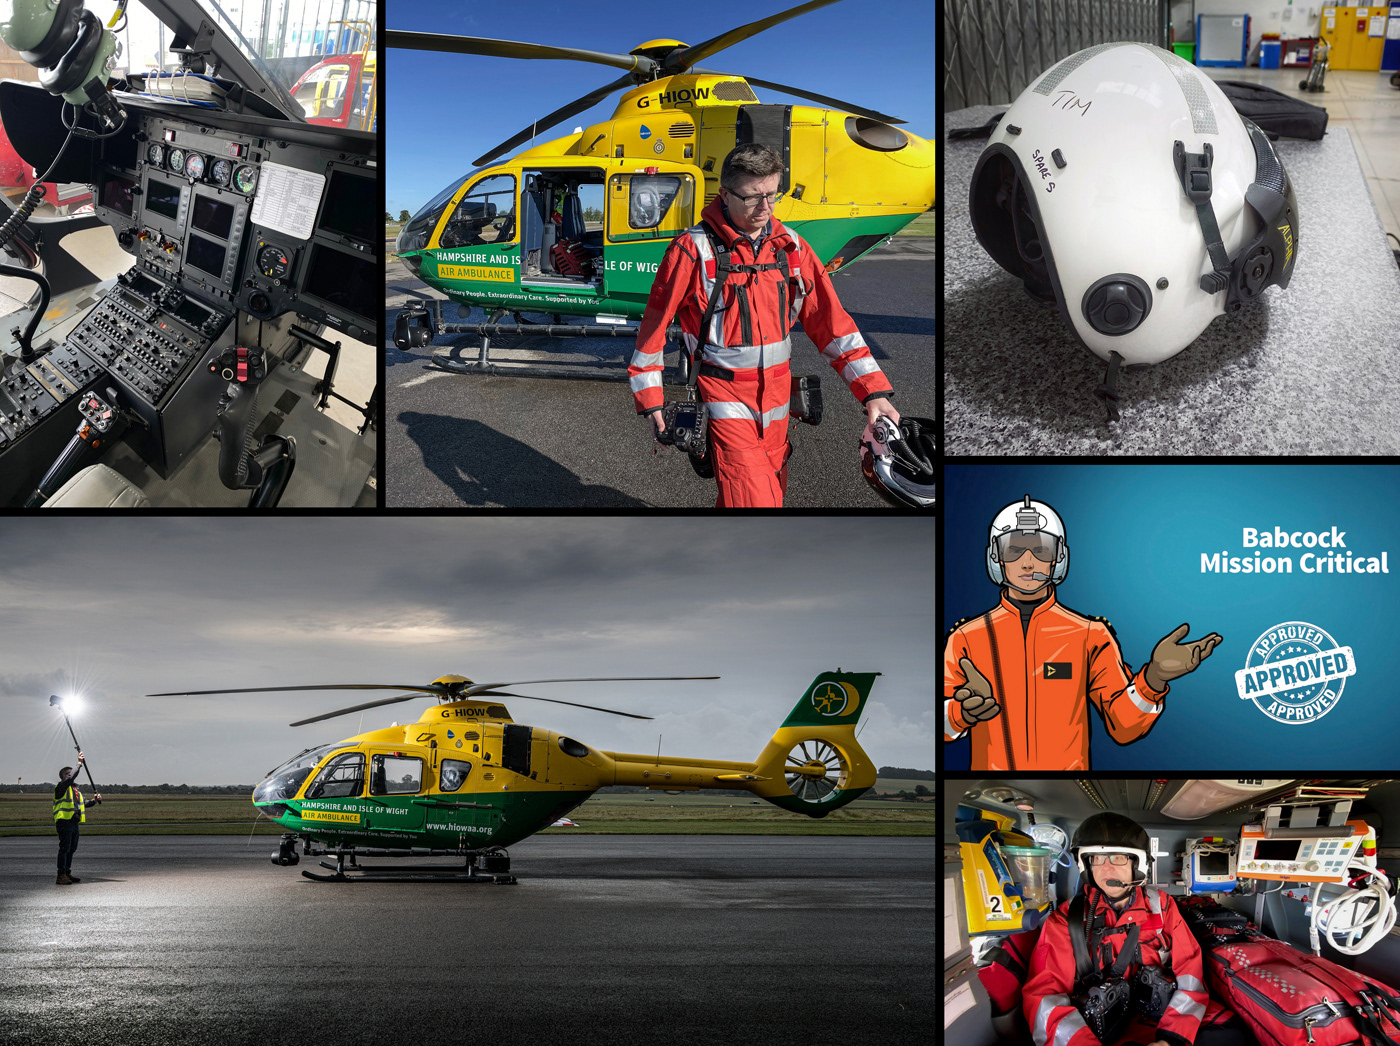 Air Ambulance Aircraft AmbientLife aviation aviation photography emergency service helicopter helimed Location Photography tim wallace